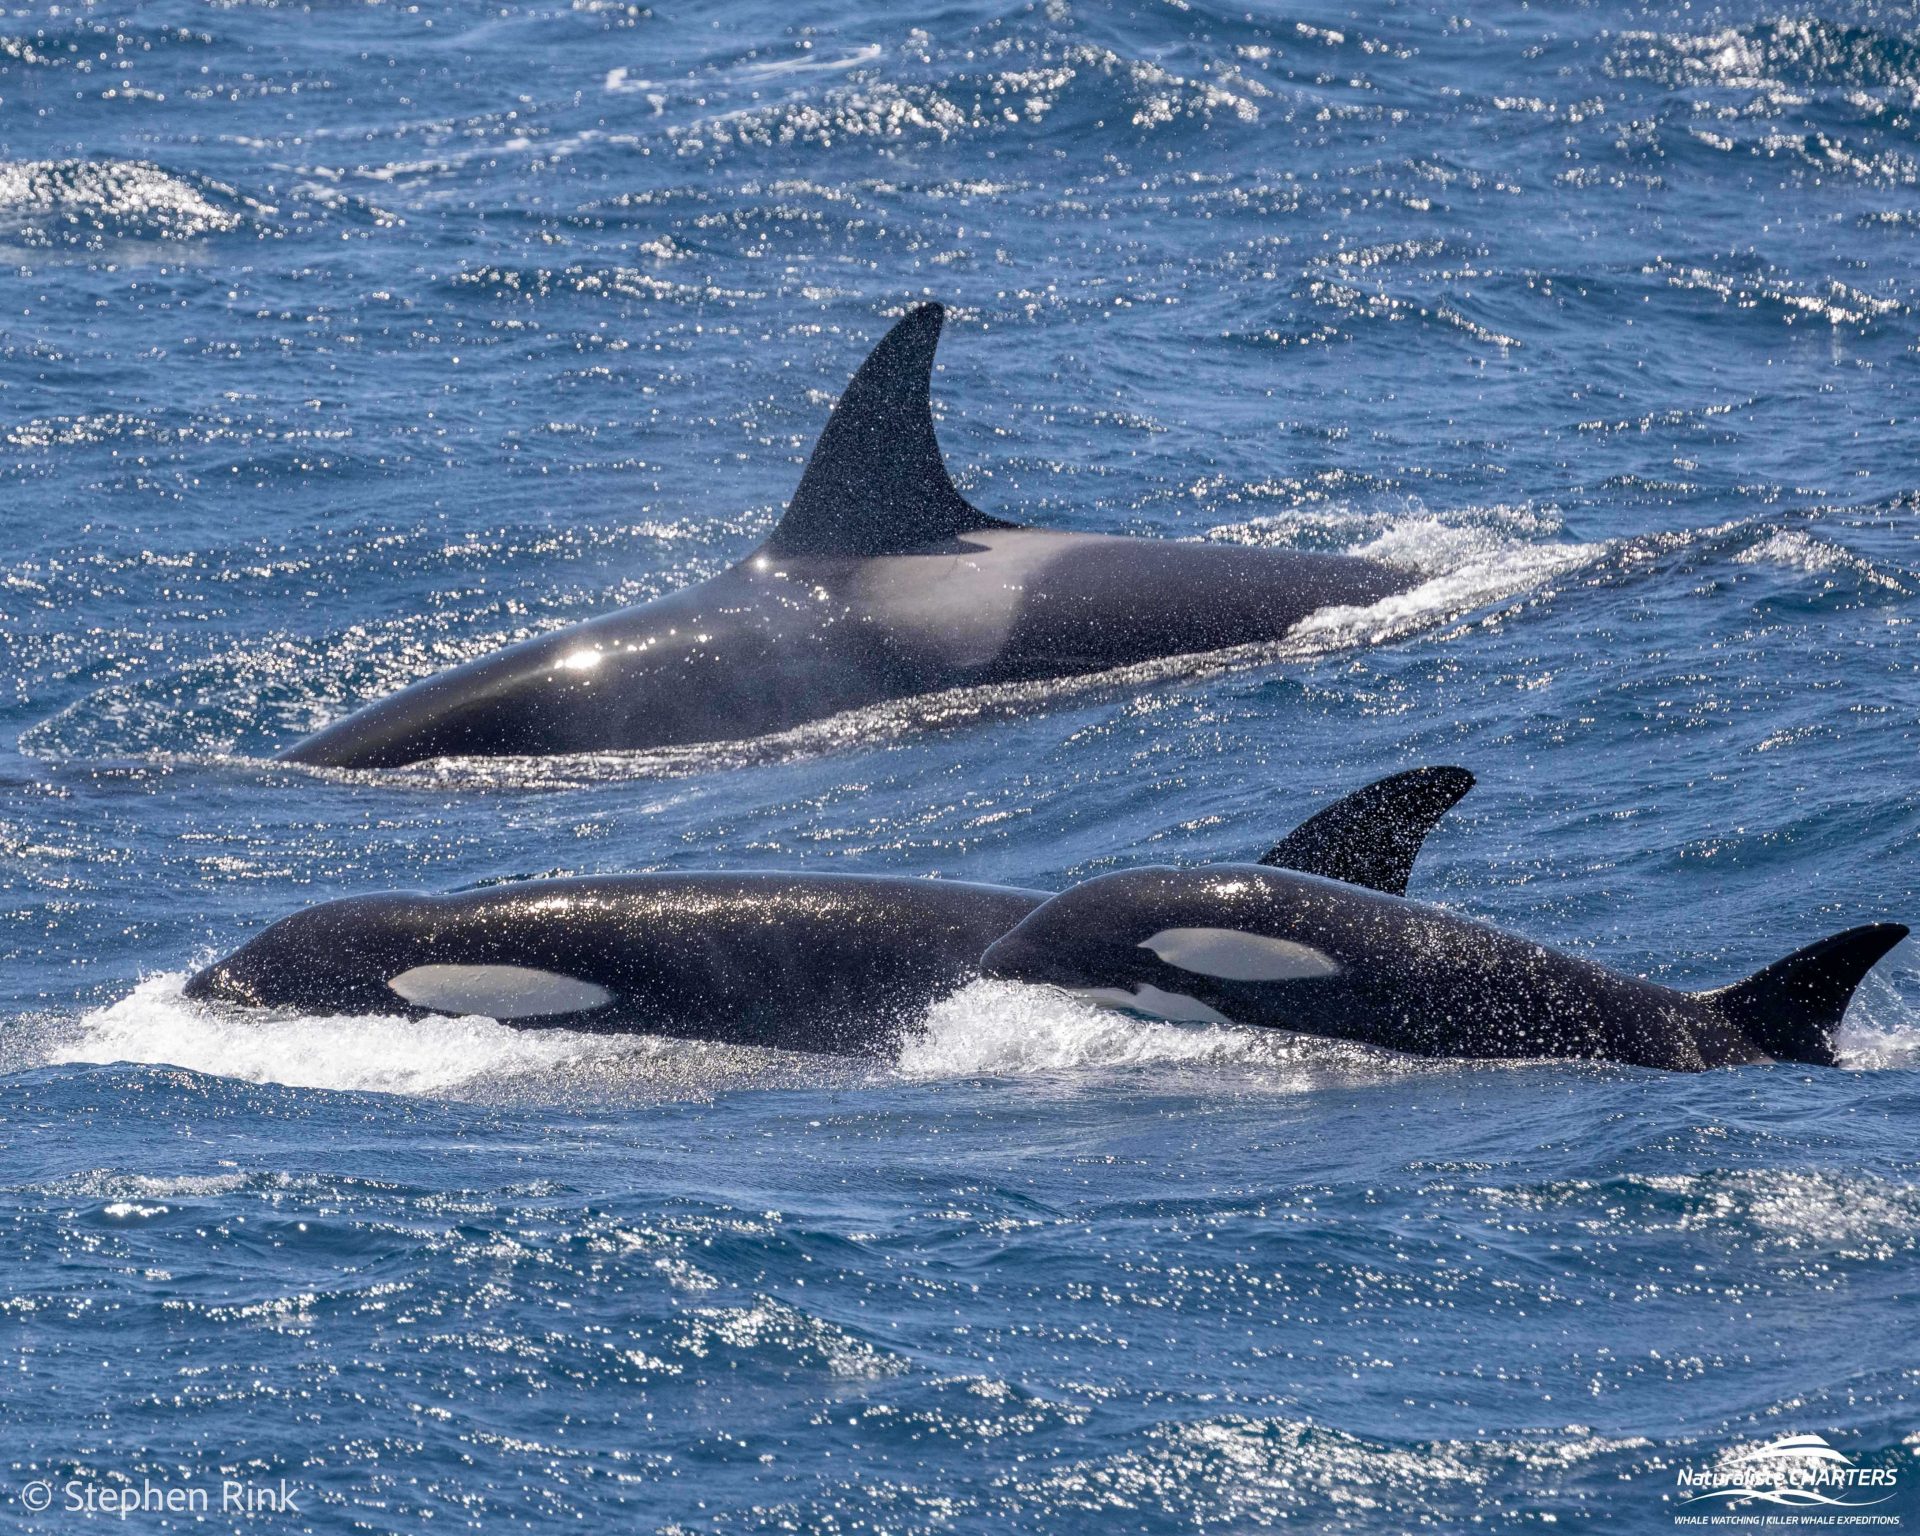 A number of calves accompanied by a female member of the pod were seen at Bremer Canyon